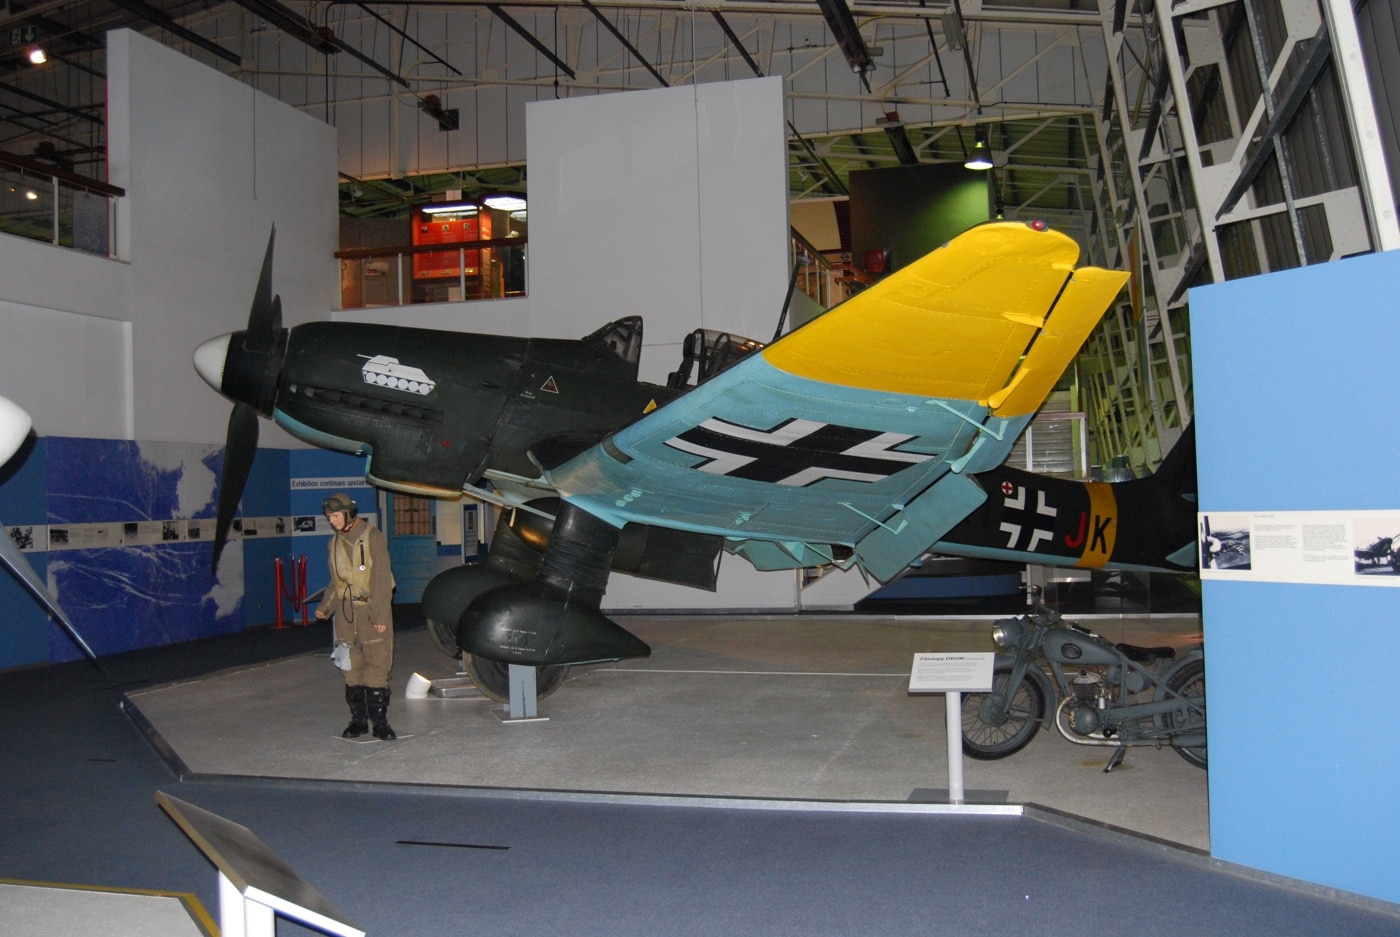 In this image, we see one of the two restored Ju 87 Stuka dive bombers left in the world. This one is in the Royal Air Force Museum. The Royal Air Force Museum London is located on the former Hendon Aerodrome, in North London's Borough of Barnet. It includes five buildings and hangars showing the history of aviation and the Royal Air Force. It is part of the Royal Air Force Museum.